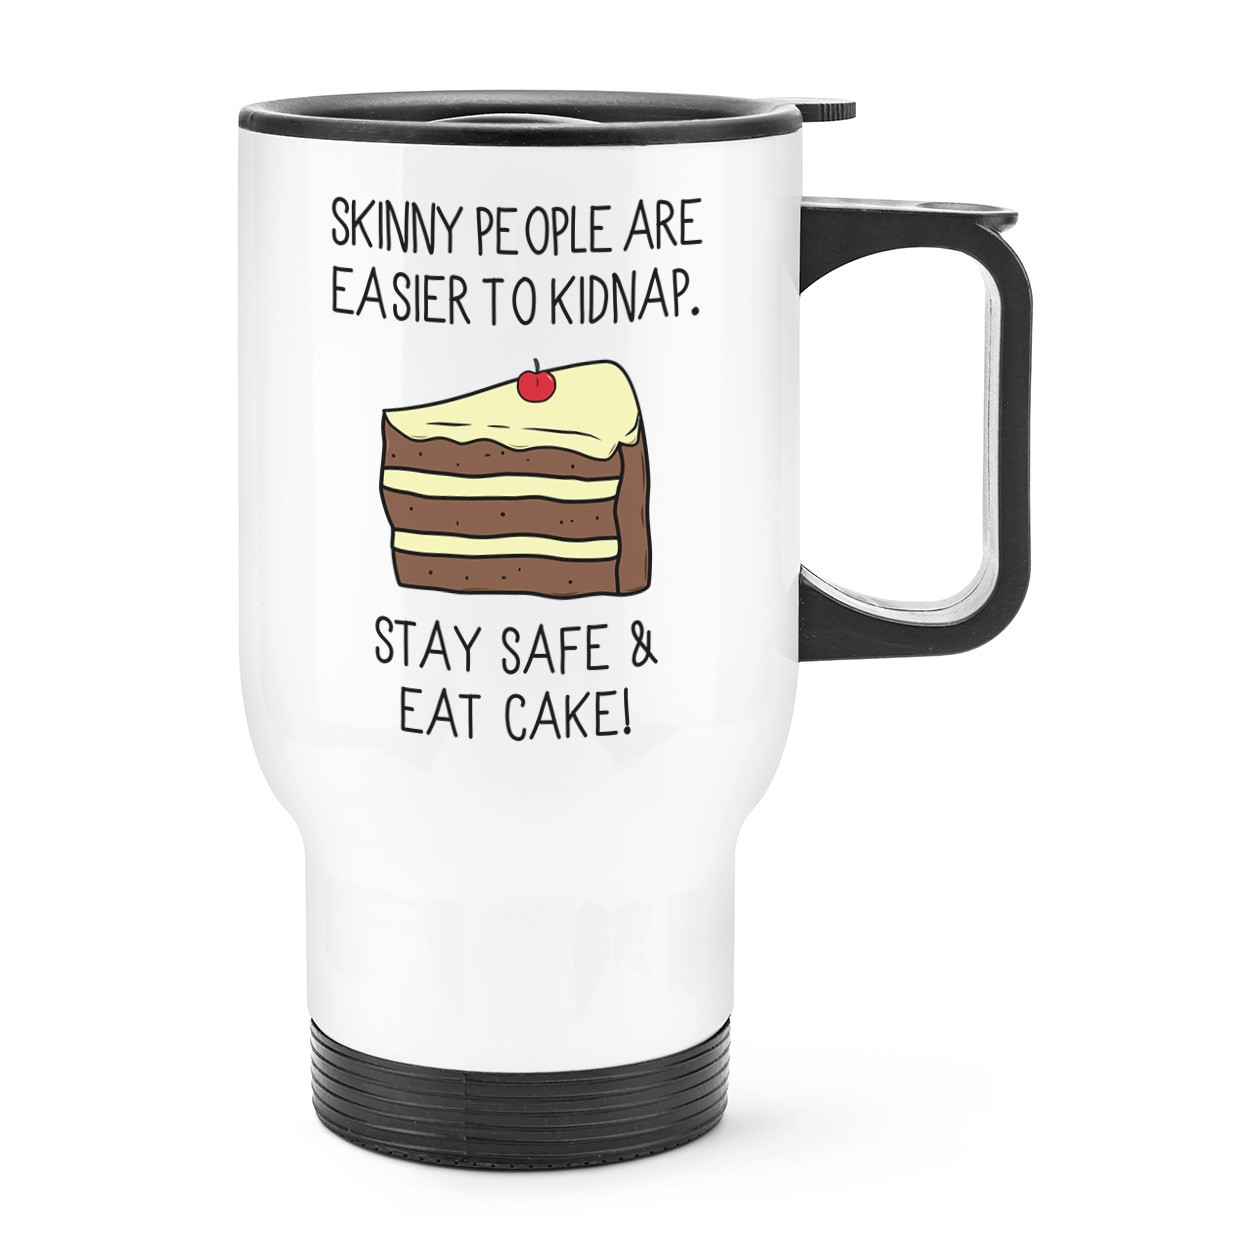 Skinny People Are Easier To Kidnap Stay Safe & Eat Cake Travel Mug Cup With Handle